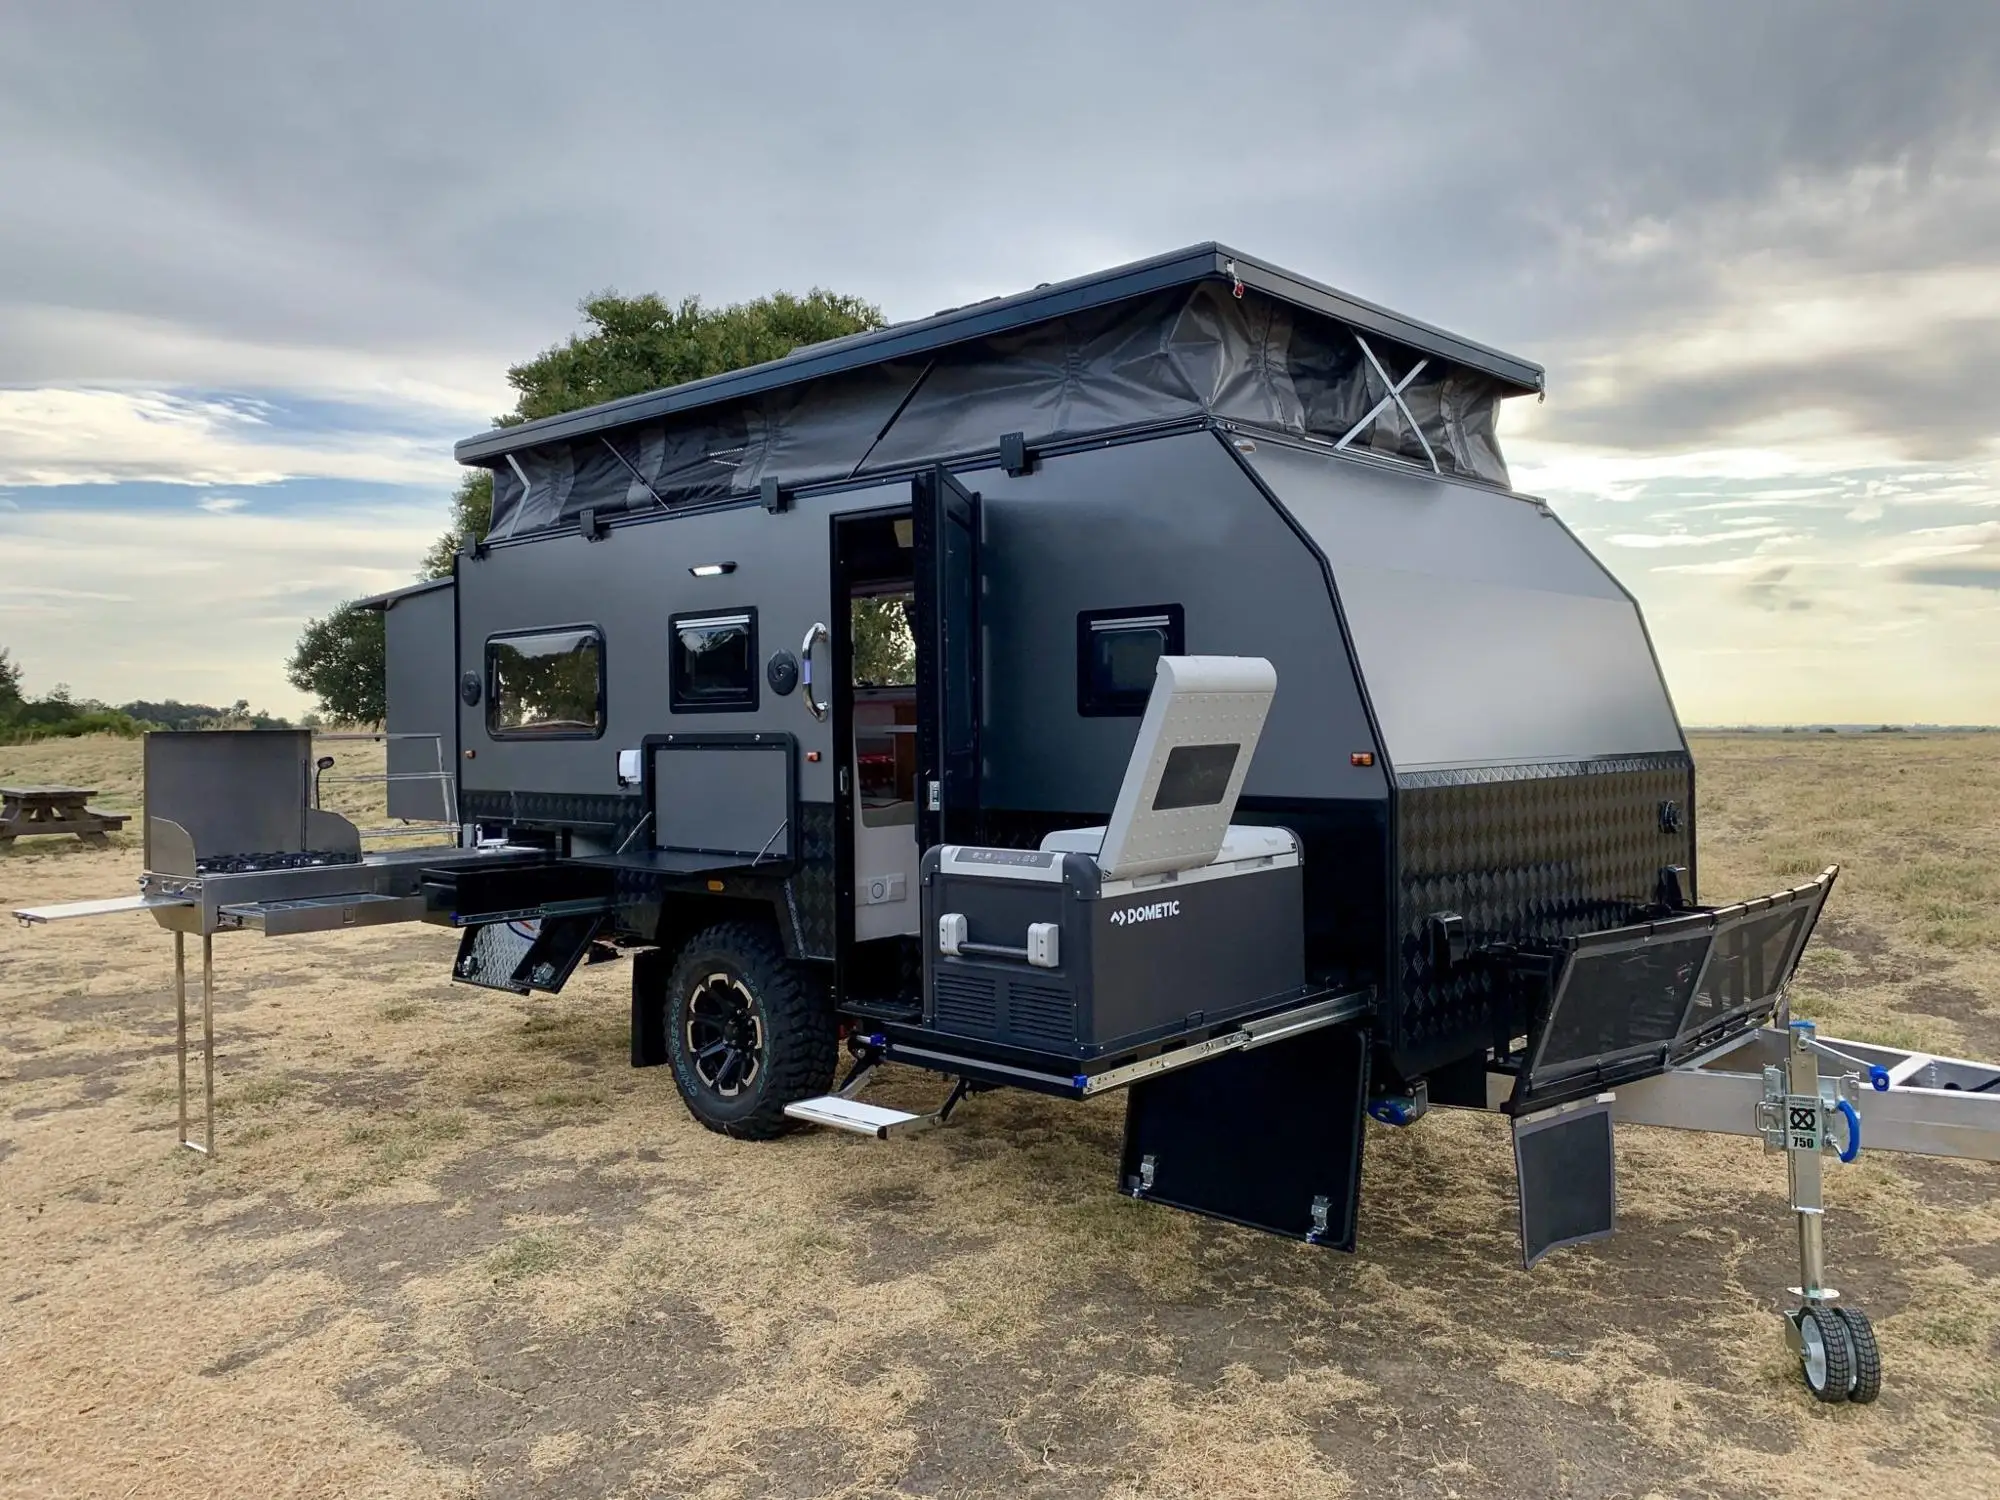 High Quality Slide Out Off Road Travel Trailer With Pop